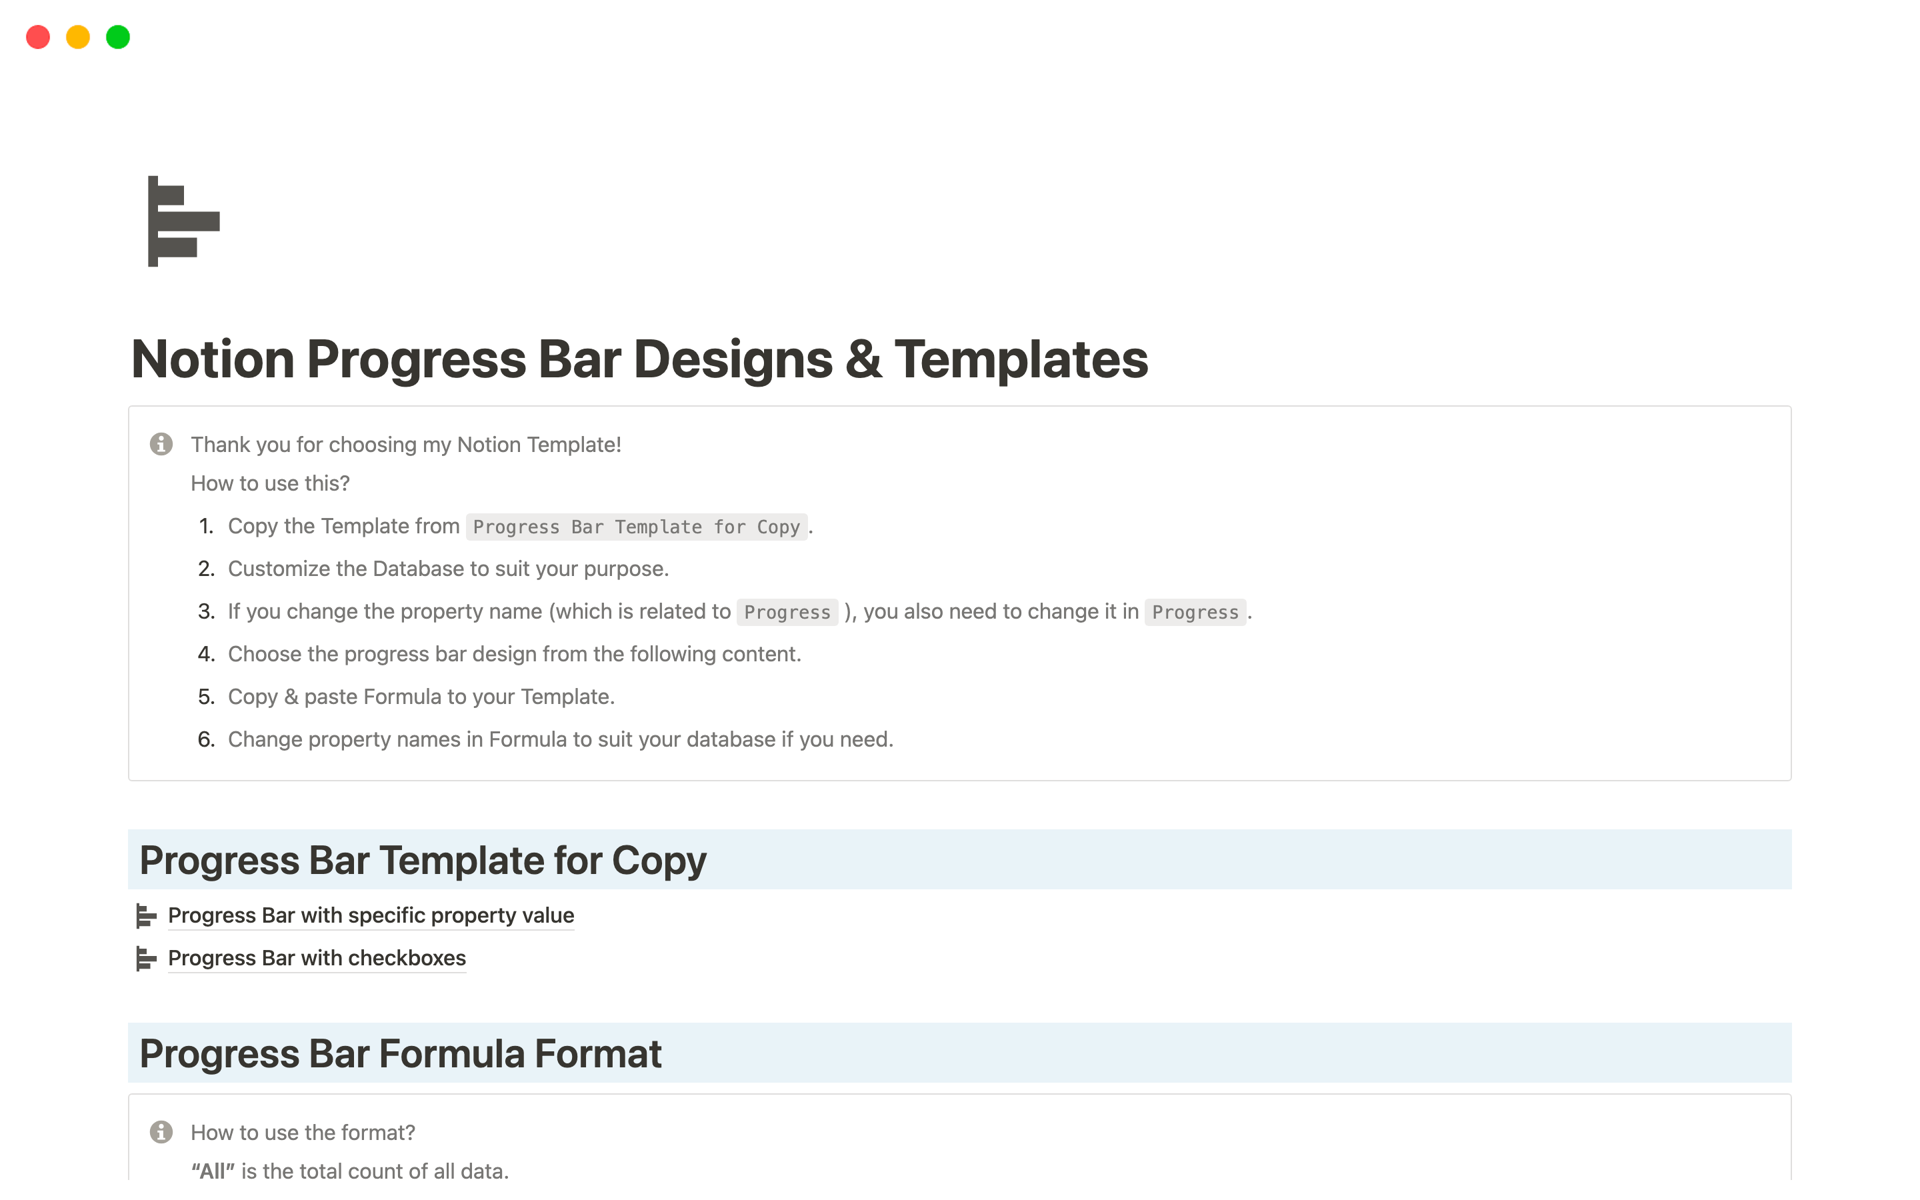 A template preview for Notion Progress Bar Designs & Templates